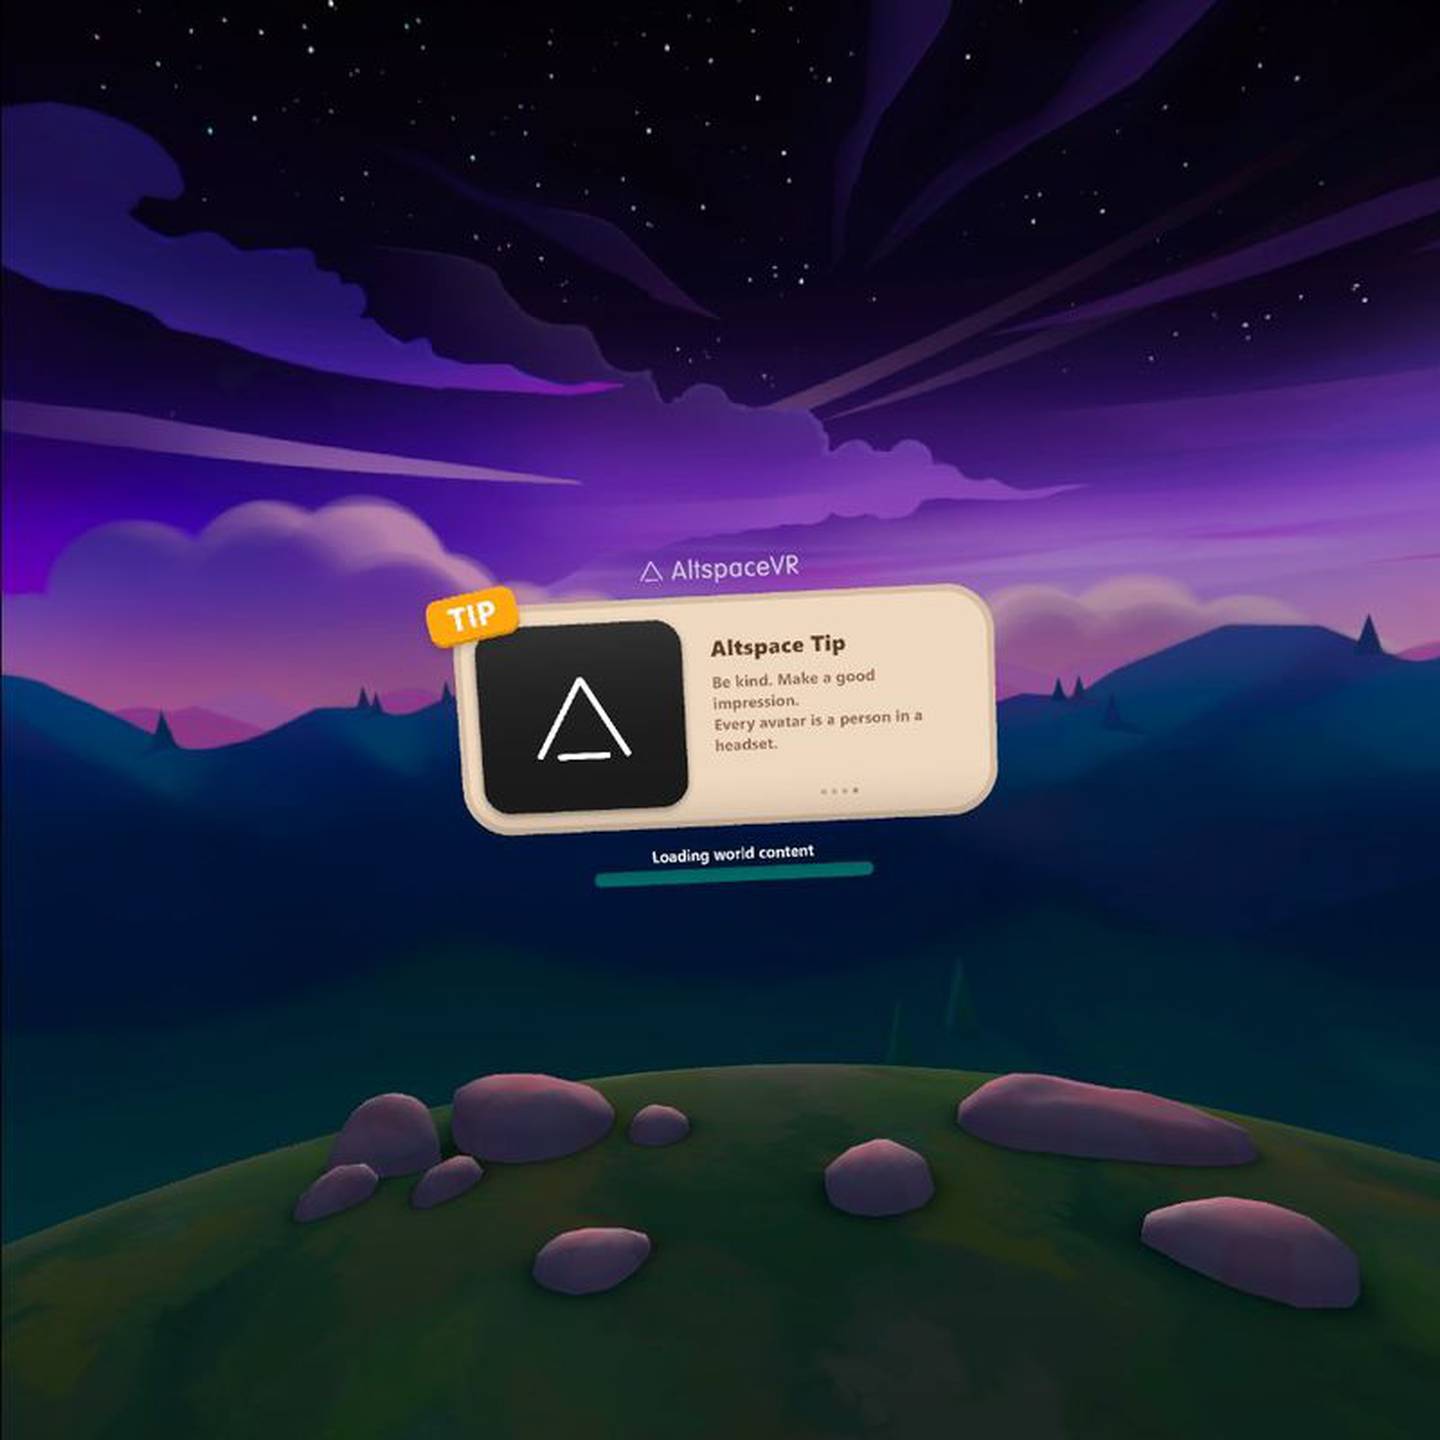 Microsoft’s social VR platform AltspaceVR offers a reminder about behavior before entering one of its virtual hangout spaces, where people strangers can mingle around a campfire or try throwing beanbags into a bin.dfd